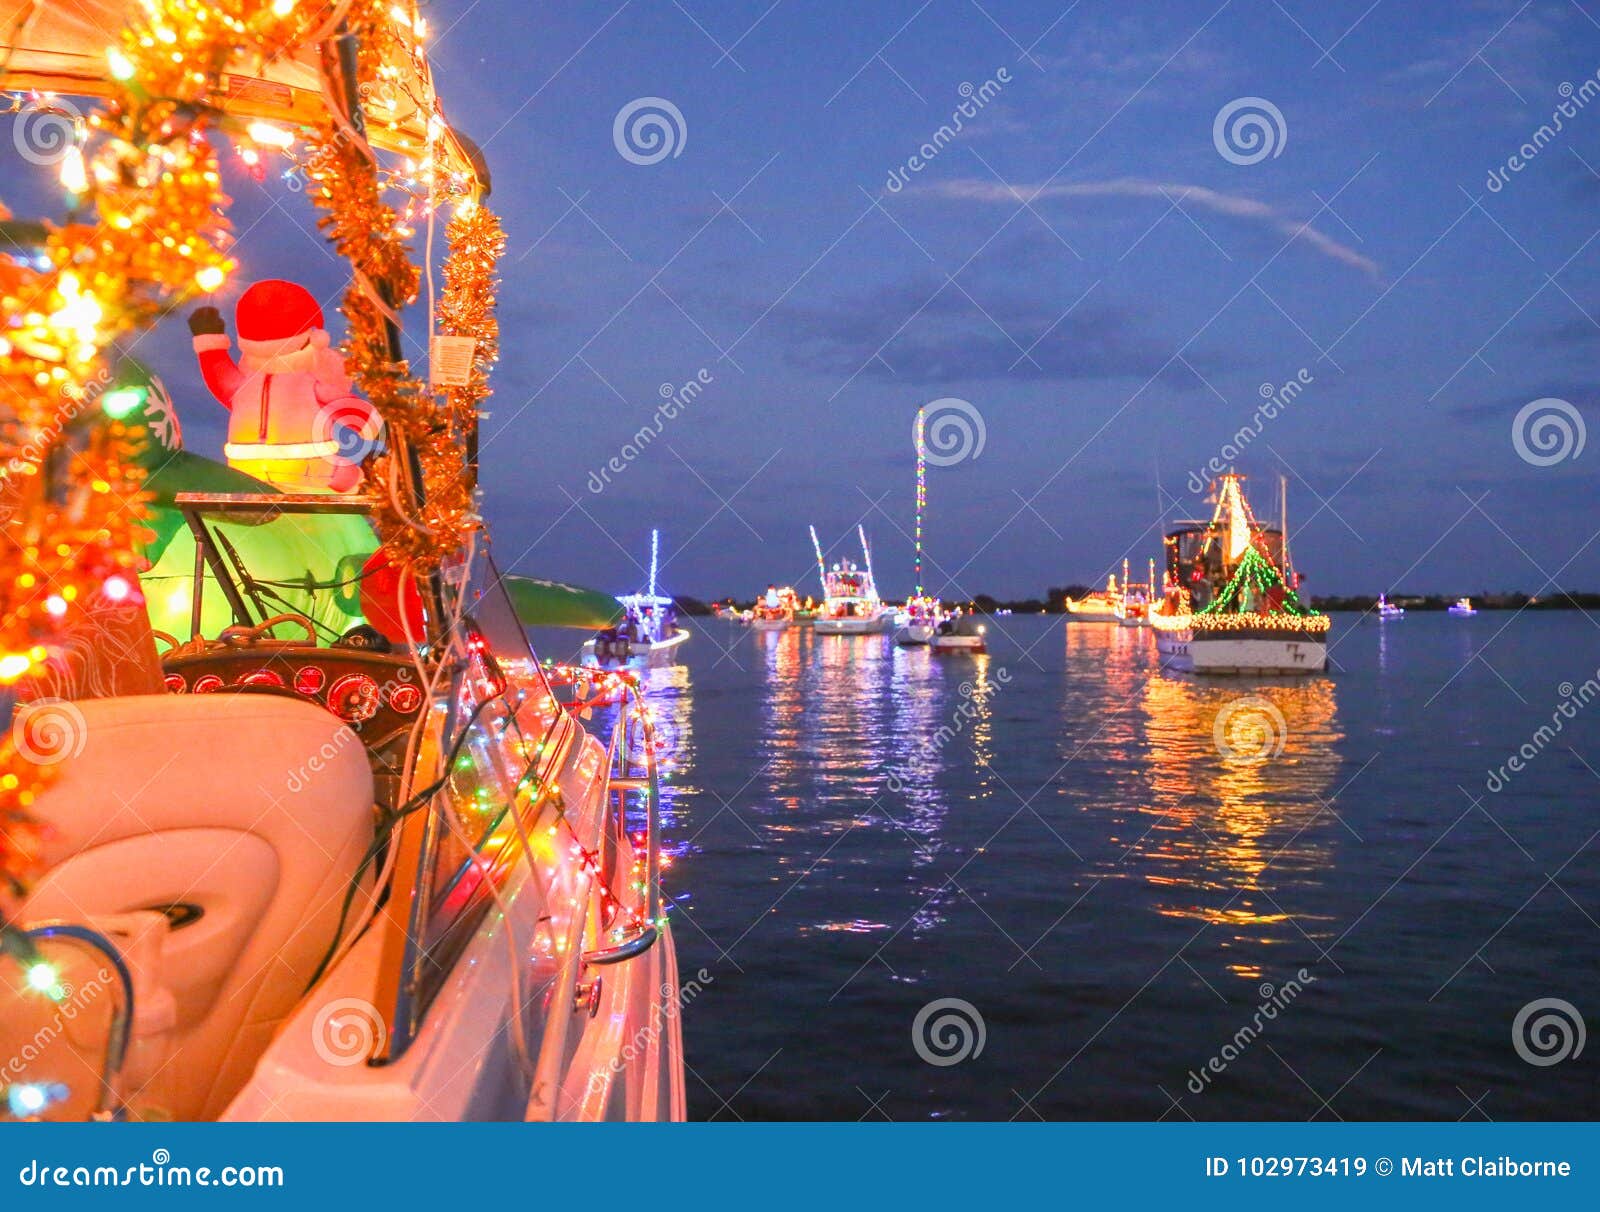 a line of decorated boats participate in a florida holiday boat